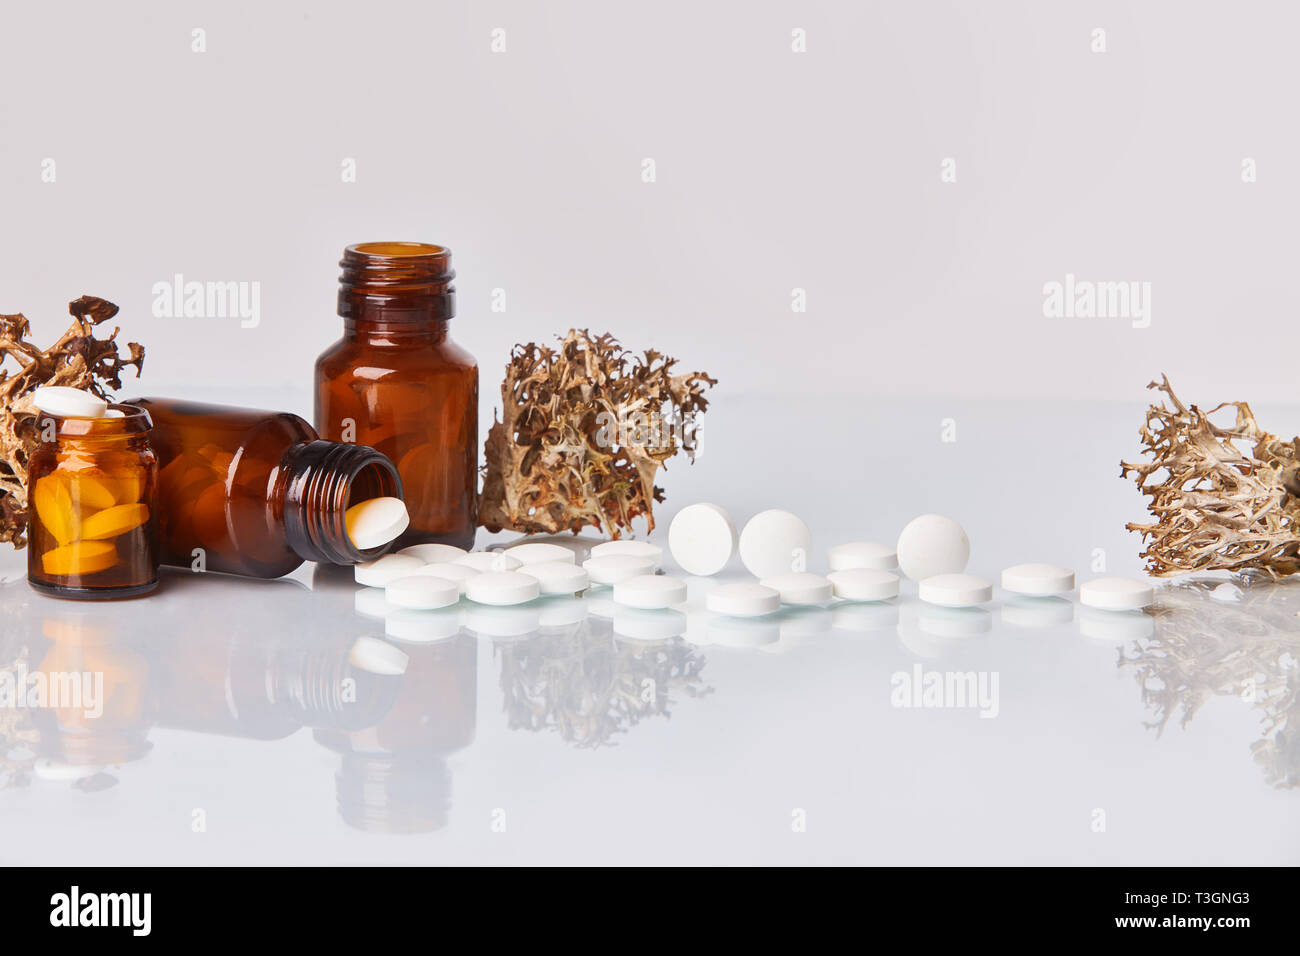 White tablets and pills with lichen (Cetraria islandica) on white mirror background.  Health care concept, cough remedy.  Homeopathic concept. Stock Photo